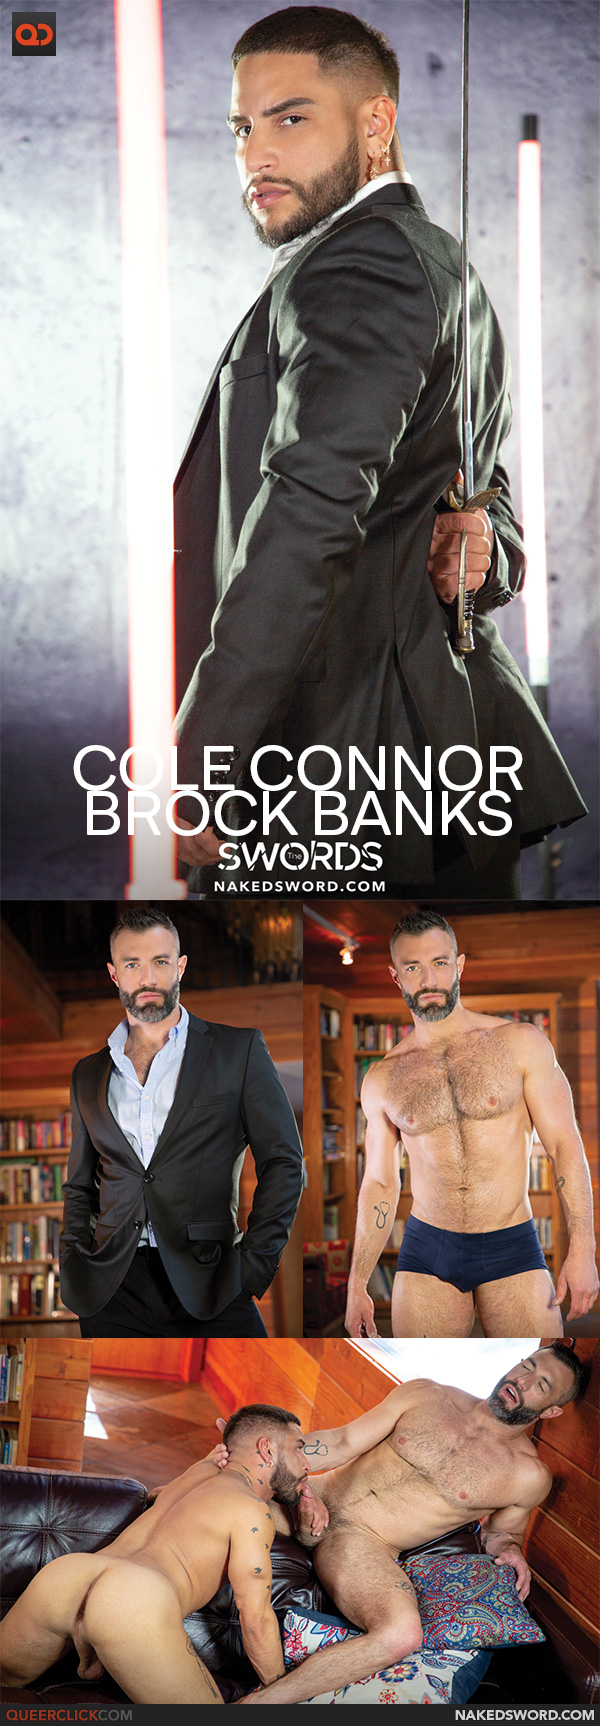 Naked Sword: Brock Banks and Cole Connor - The Swords Scene 3 -BLACK FRIDAY SAVINGS